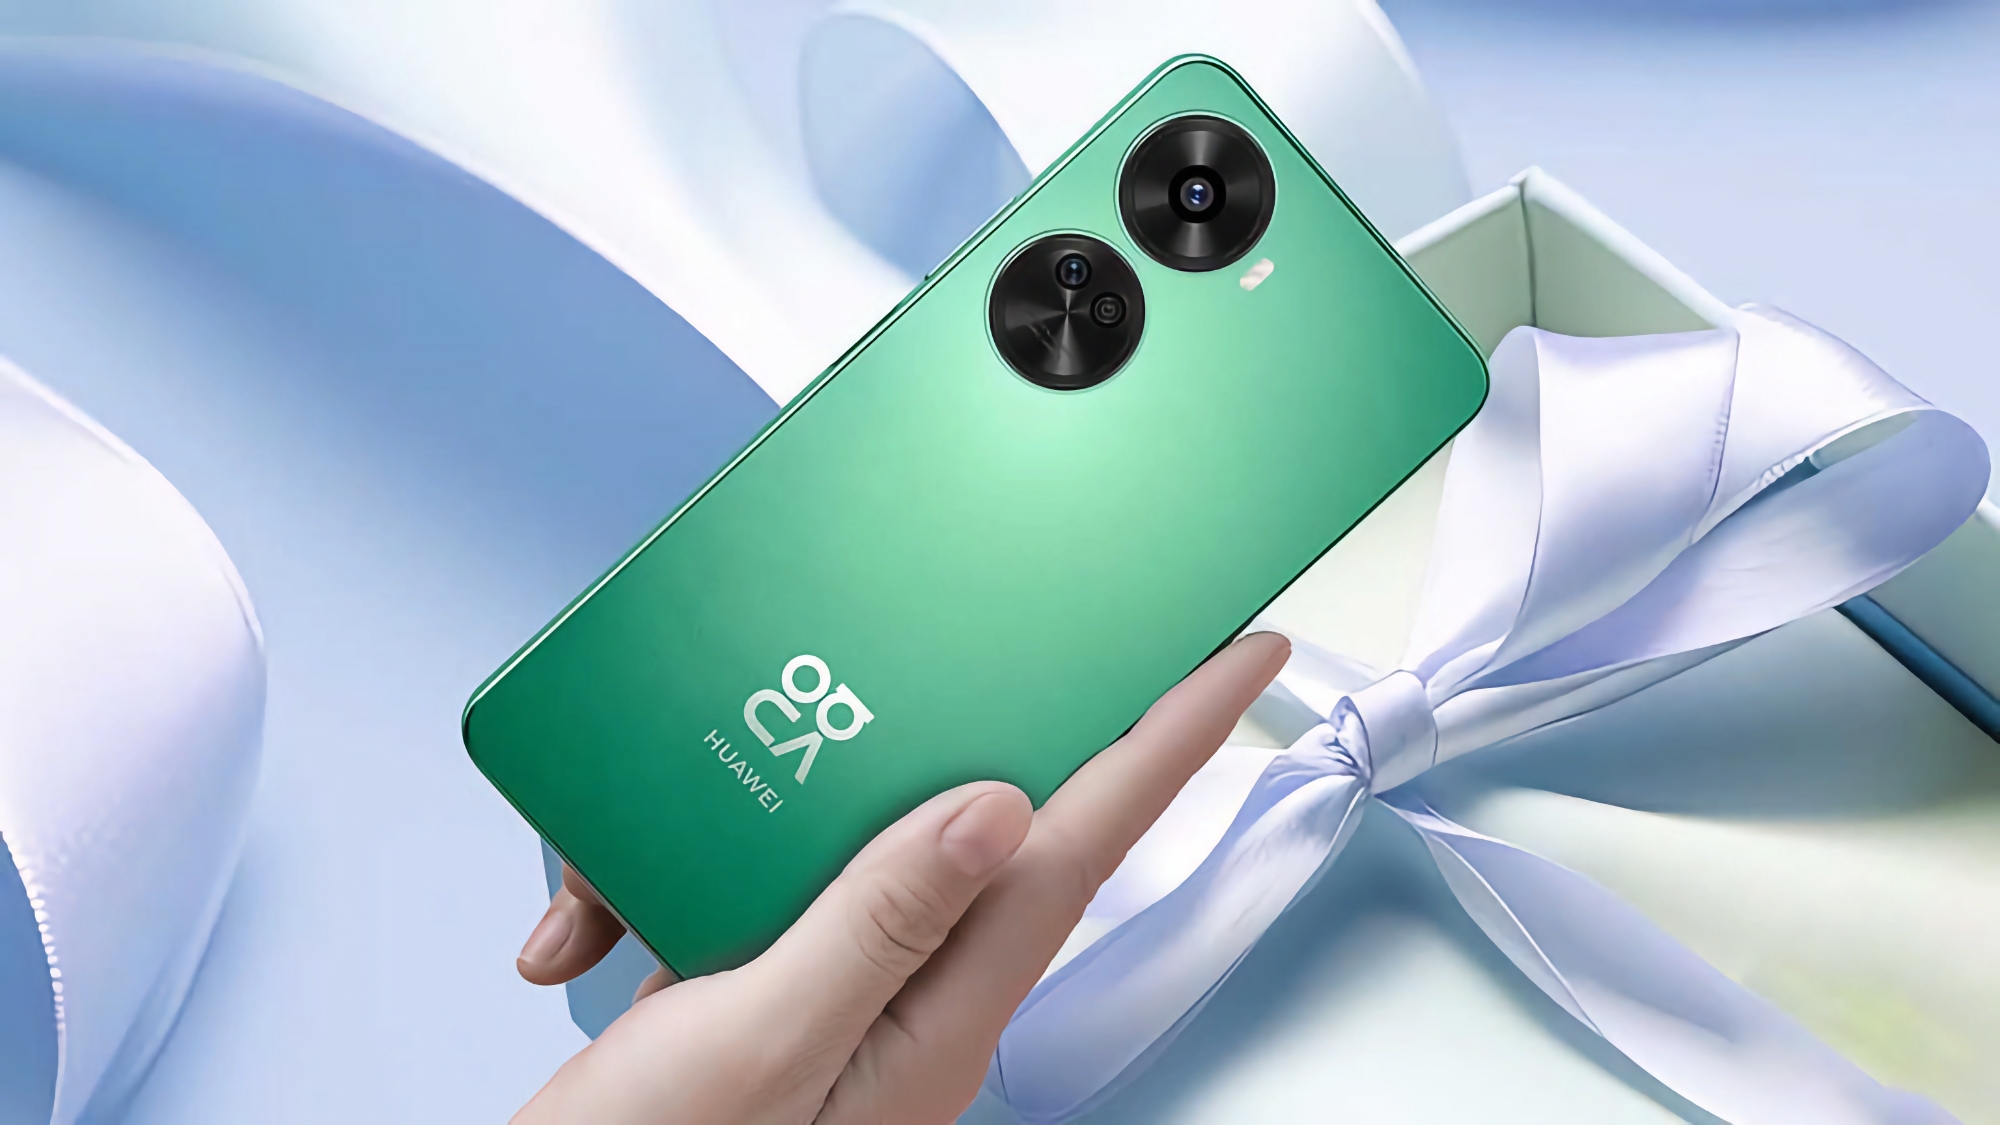 Huawei Nova 11 SE, Huawei Nova 10 SE, Huawei Nova 9 SE and four more smartphones from the company have received the stable version of HarmonyOS 4.2